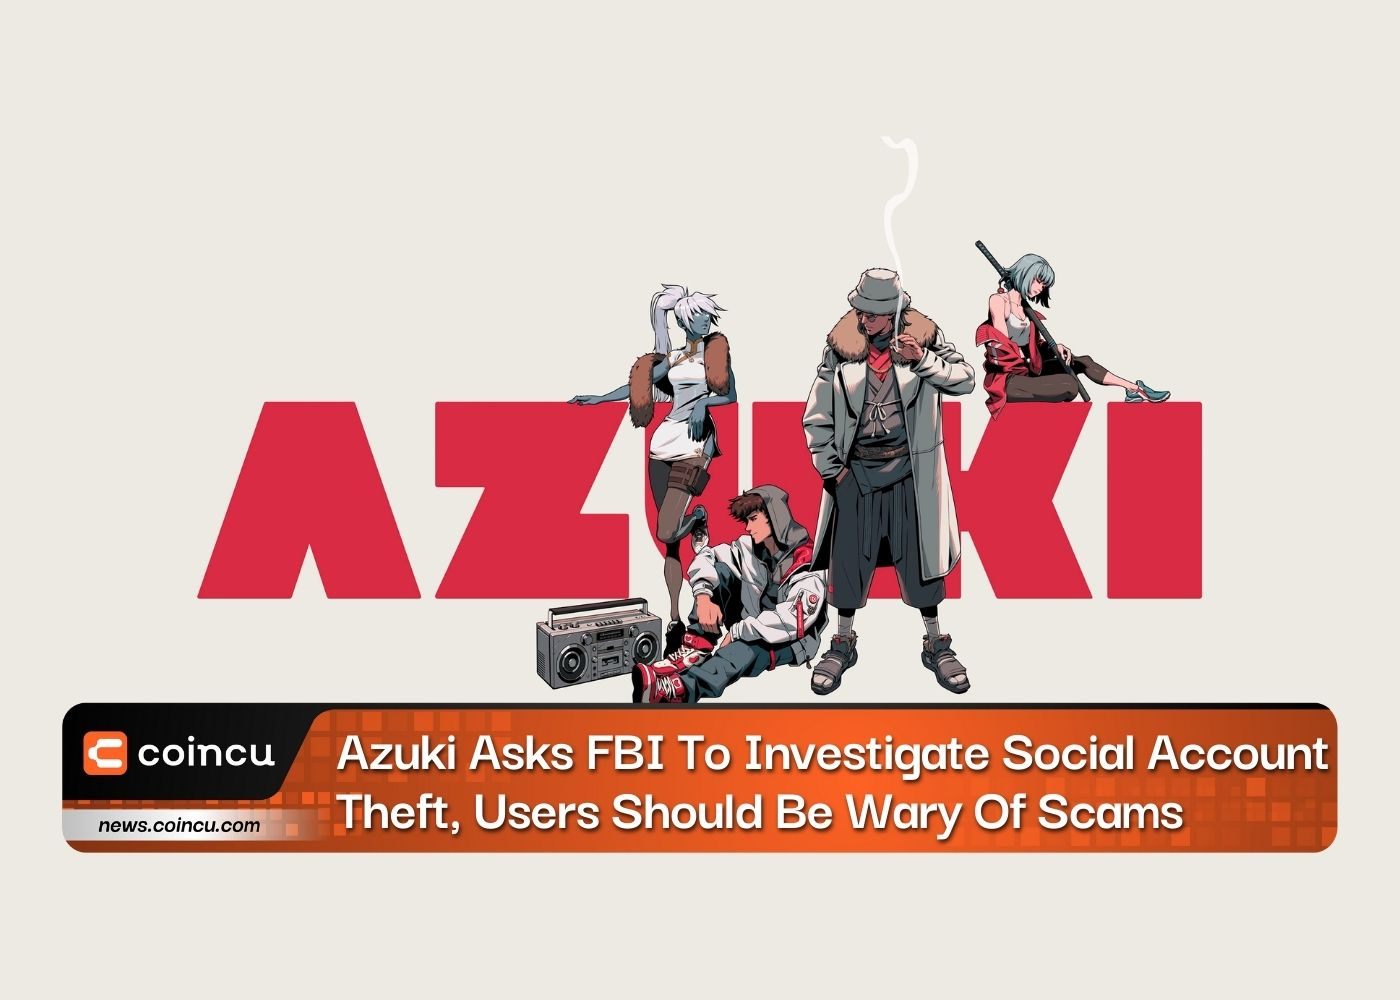 Azuki Asks FBI To Investigate Social Account Theft, Users Should Be Wary Of Scams